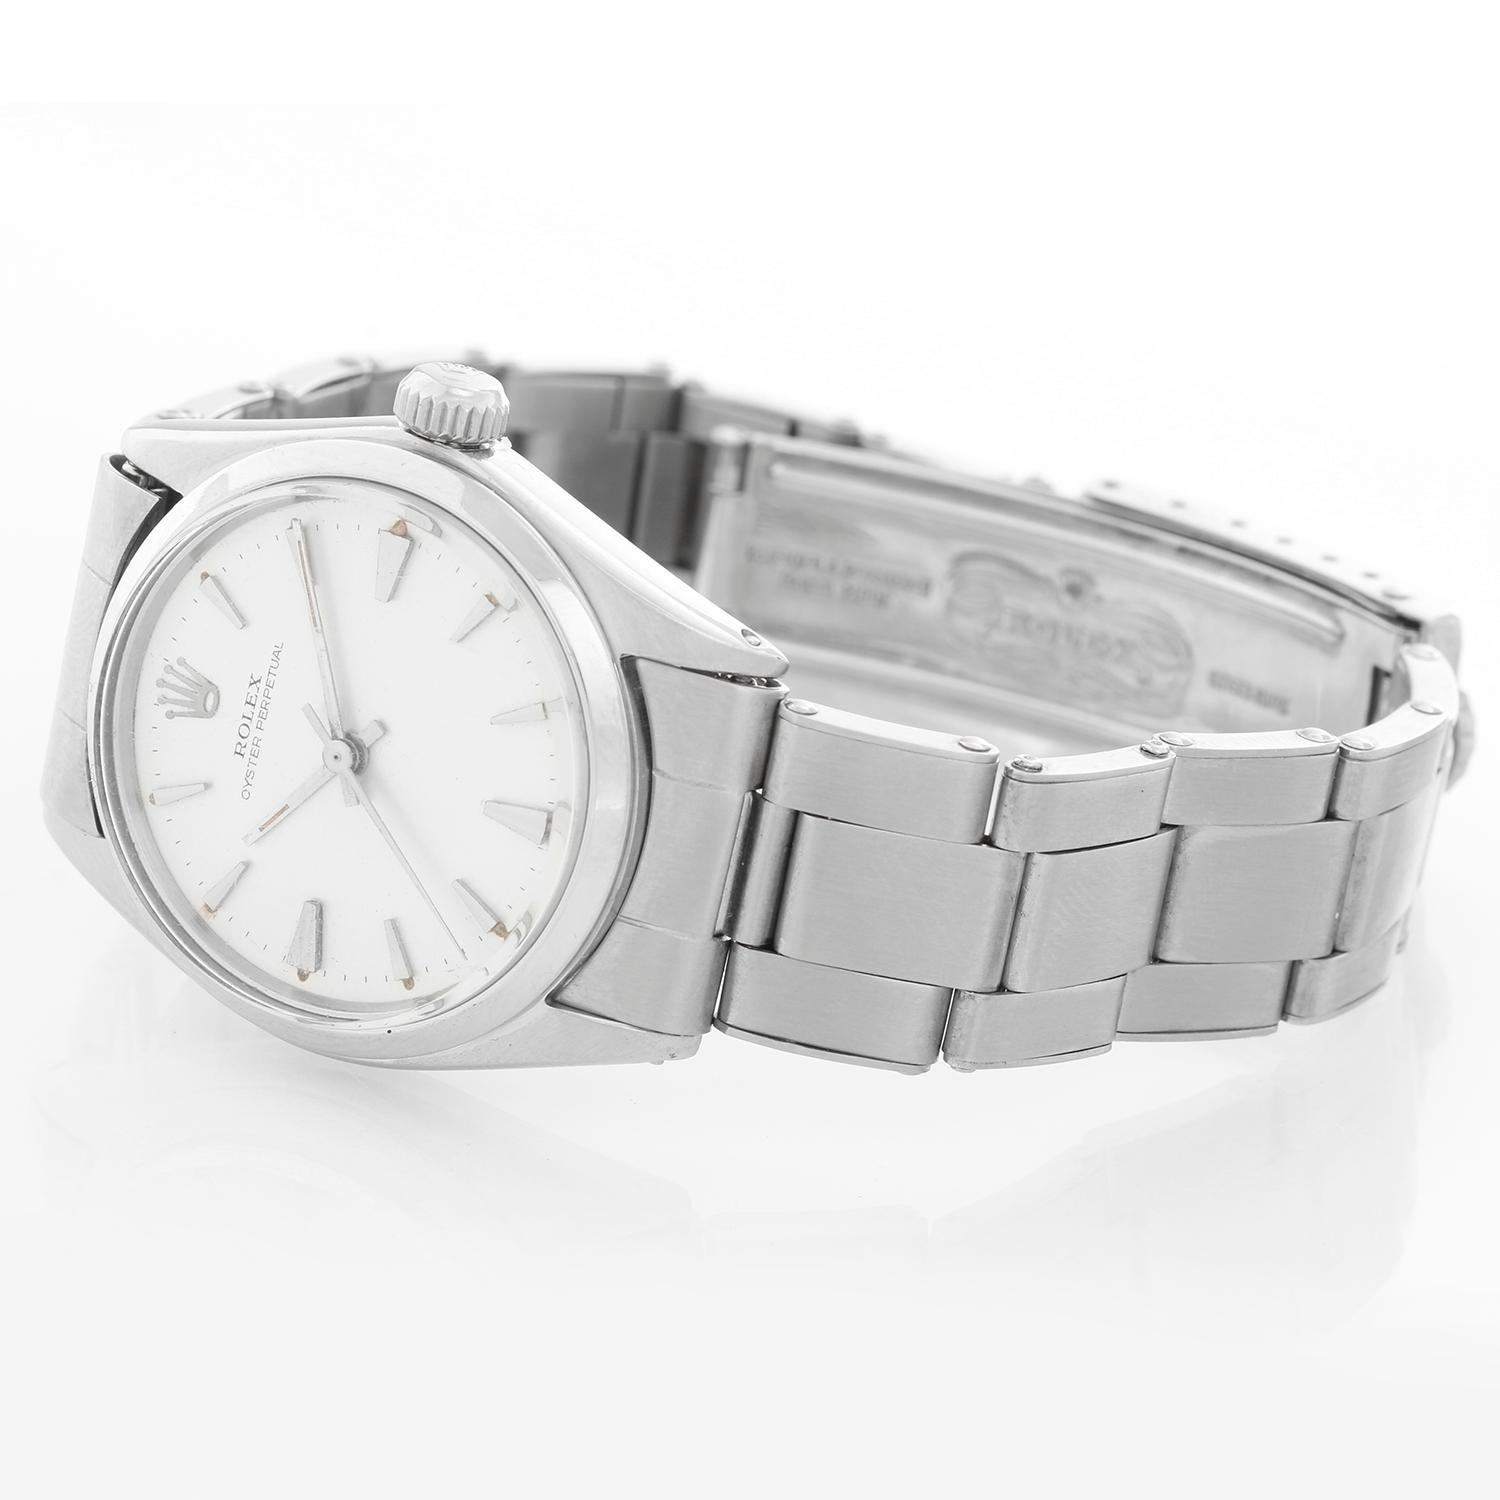 Rolex Vintage Oyster Perpetual Stainless Steel Midsize Watch 6548 - Automatic winding; acrylic crystal. Stainless steel with smooth bezel (31mm diameter). Silver dial with gold markers. Stainless Steel Rolex oyster bracelet. Pre-owned with custom